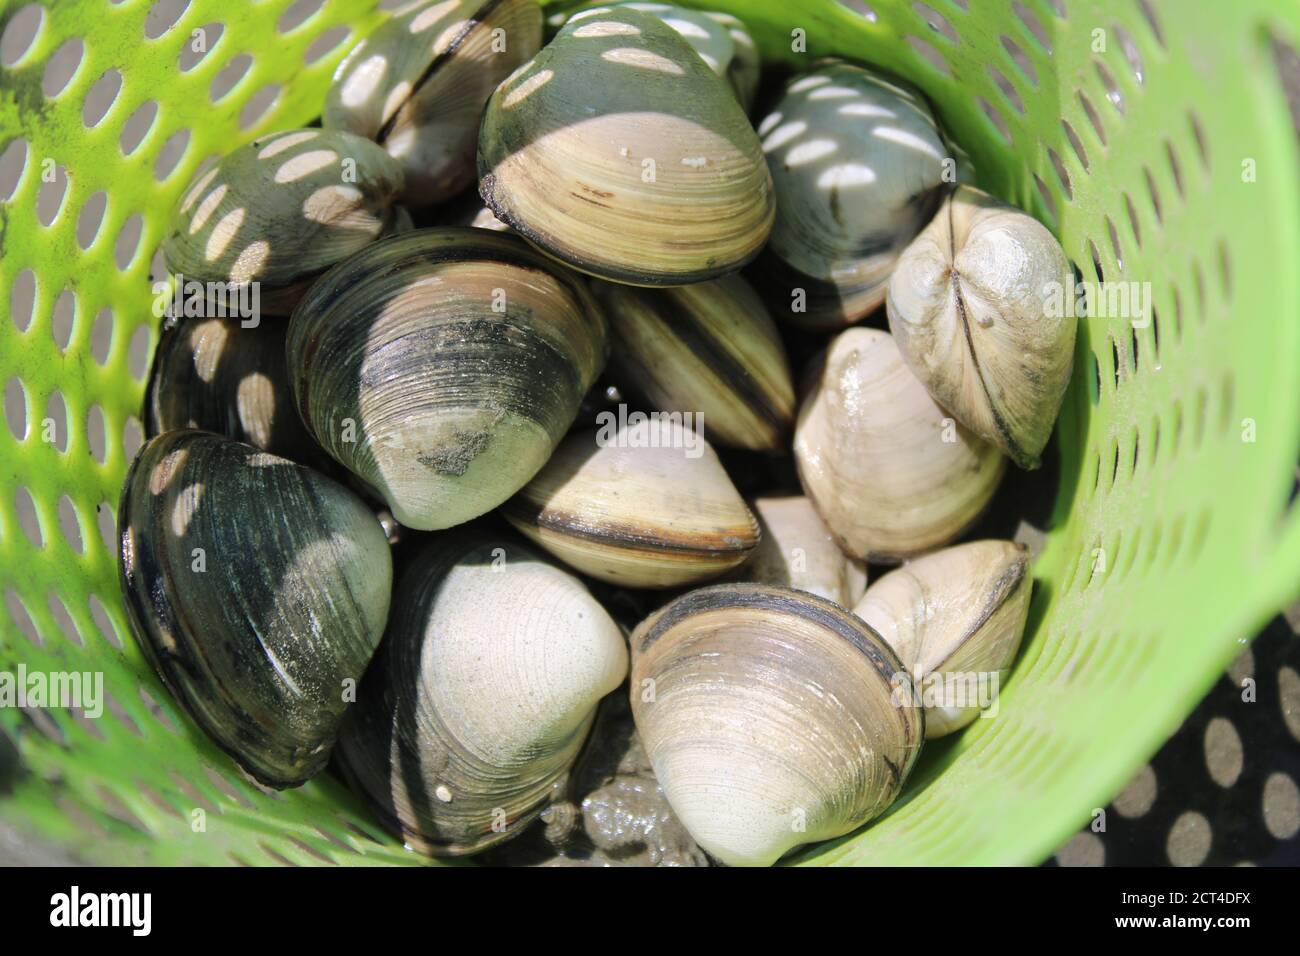 Fresh live clams in a green digger's basket Stock Photo - Alamy